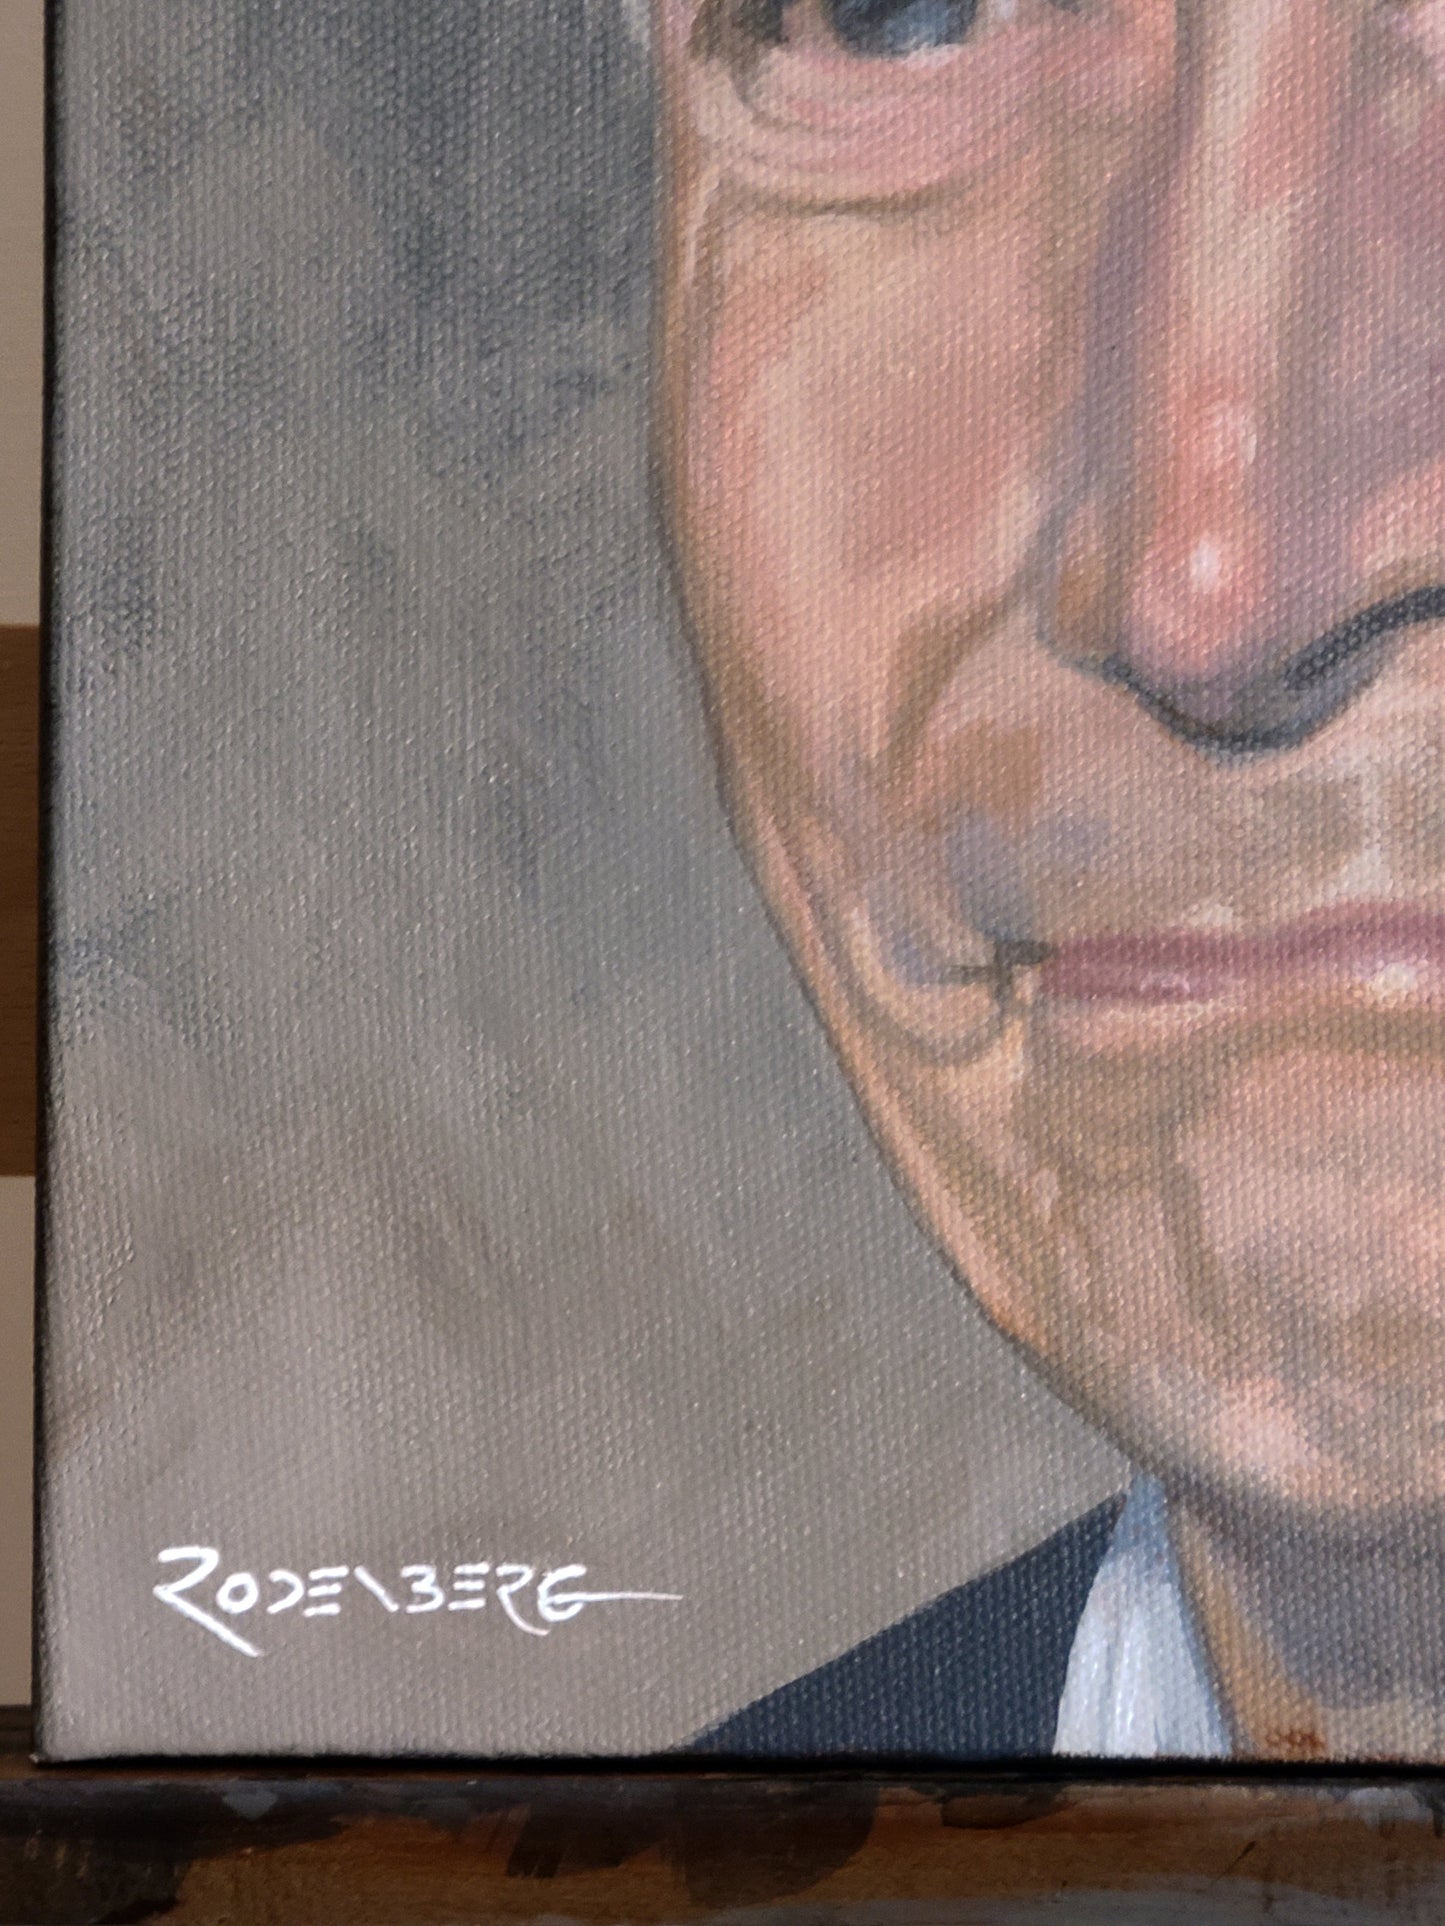 Charlie Watts / Rolling Stones painting